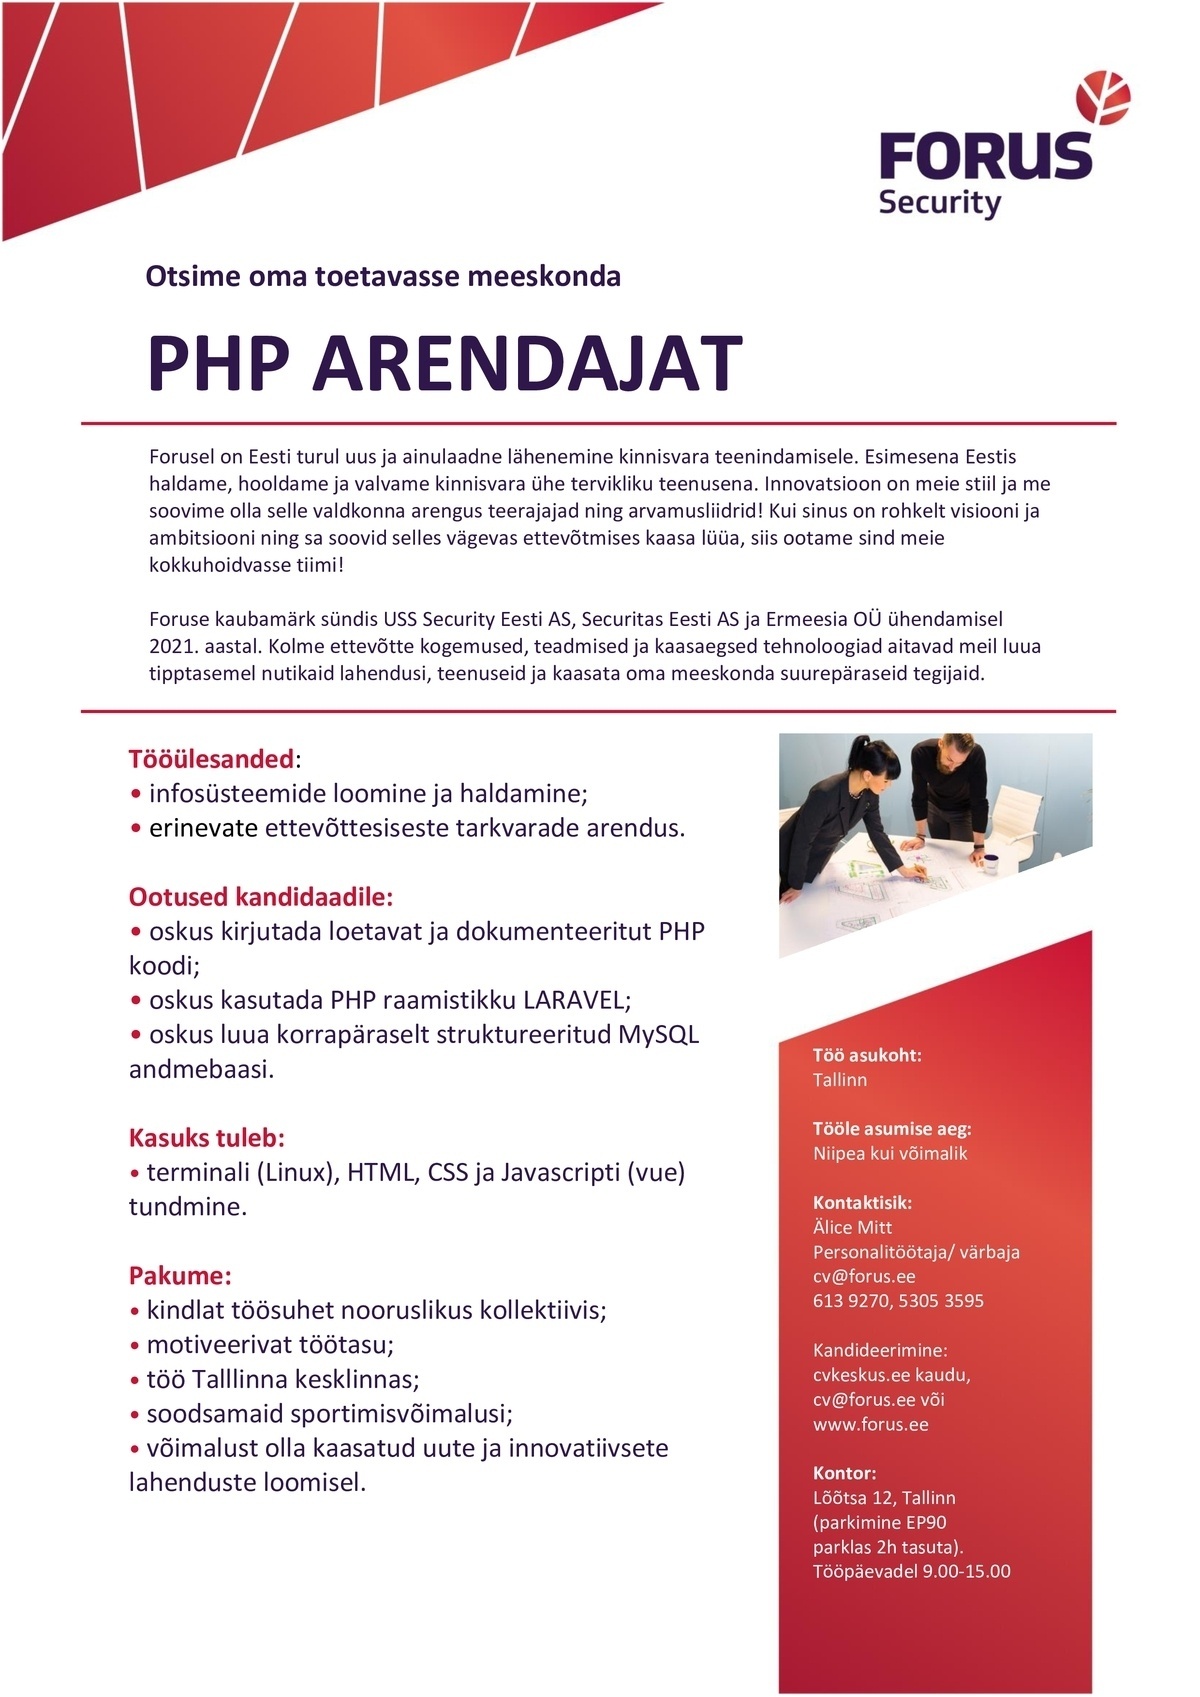 FORUS SECURITY AS PHP ARENDAJAT